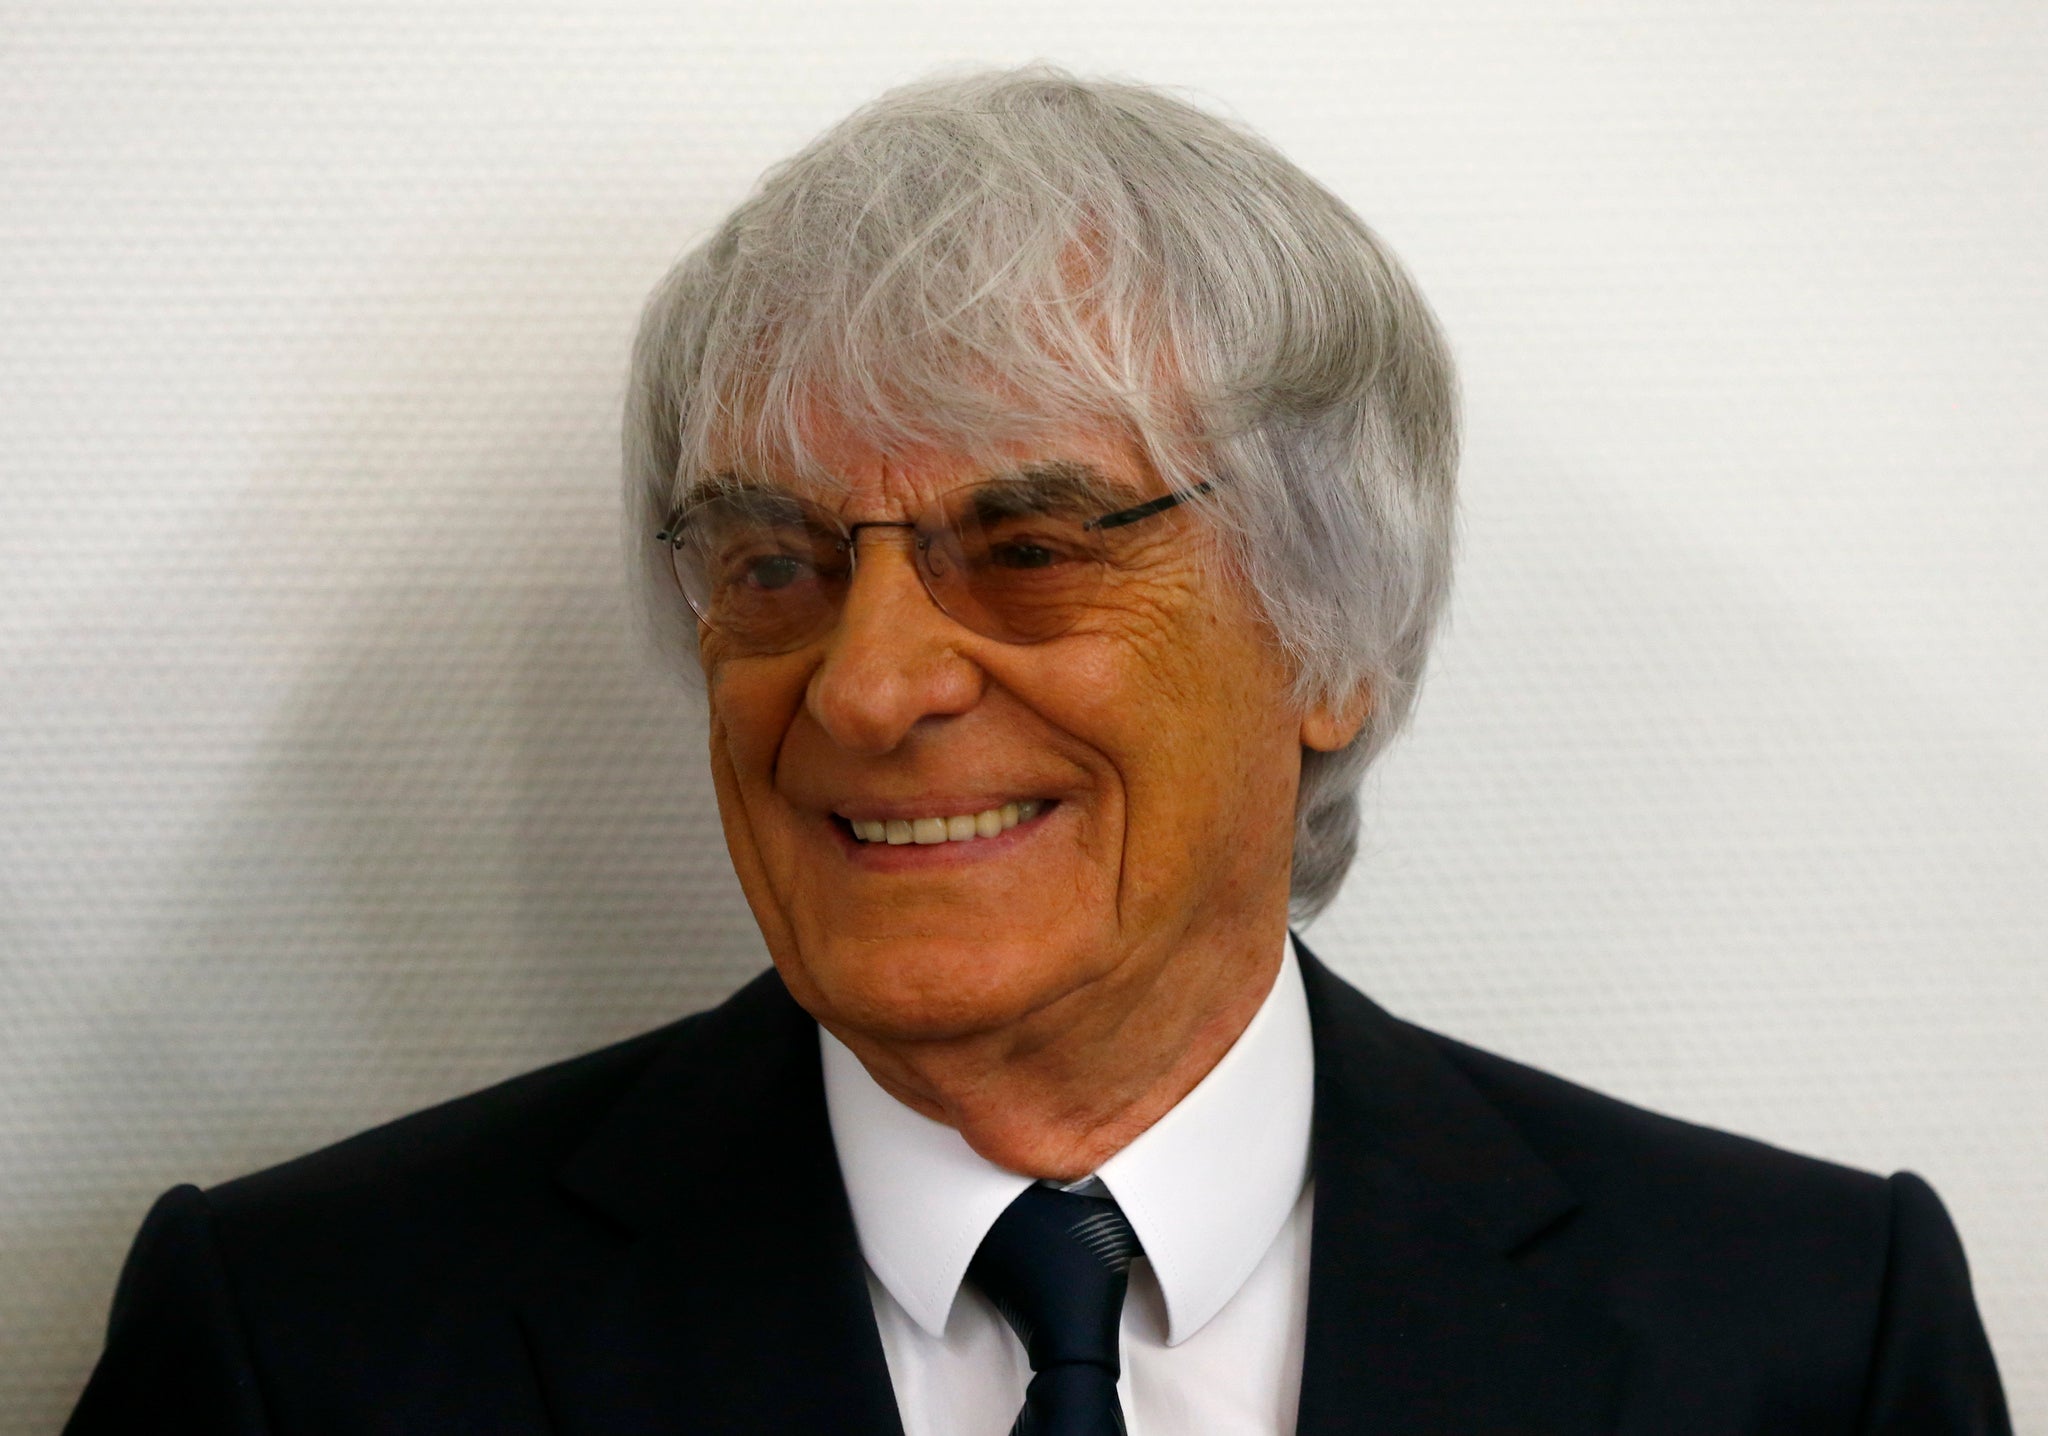 F1 boss Bernie Ecclestone has had his bribery case thrown out of court after making a one-off payment of $100m